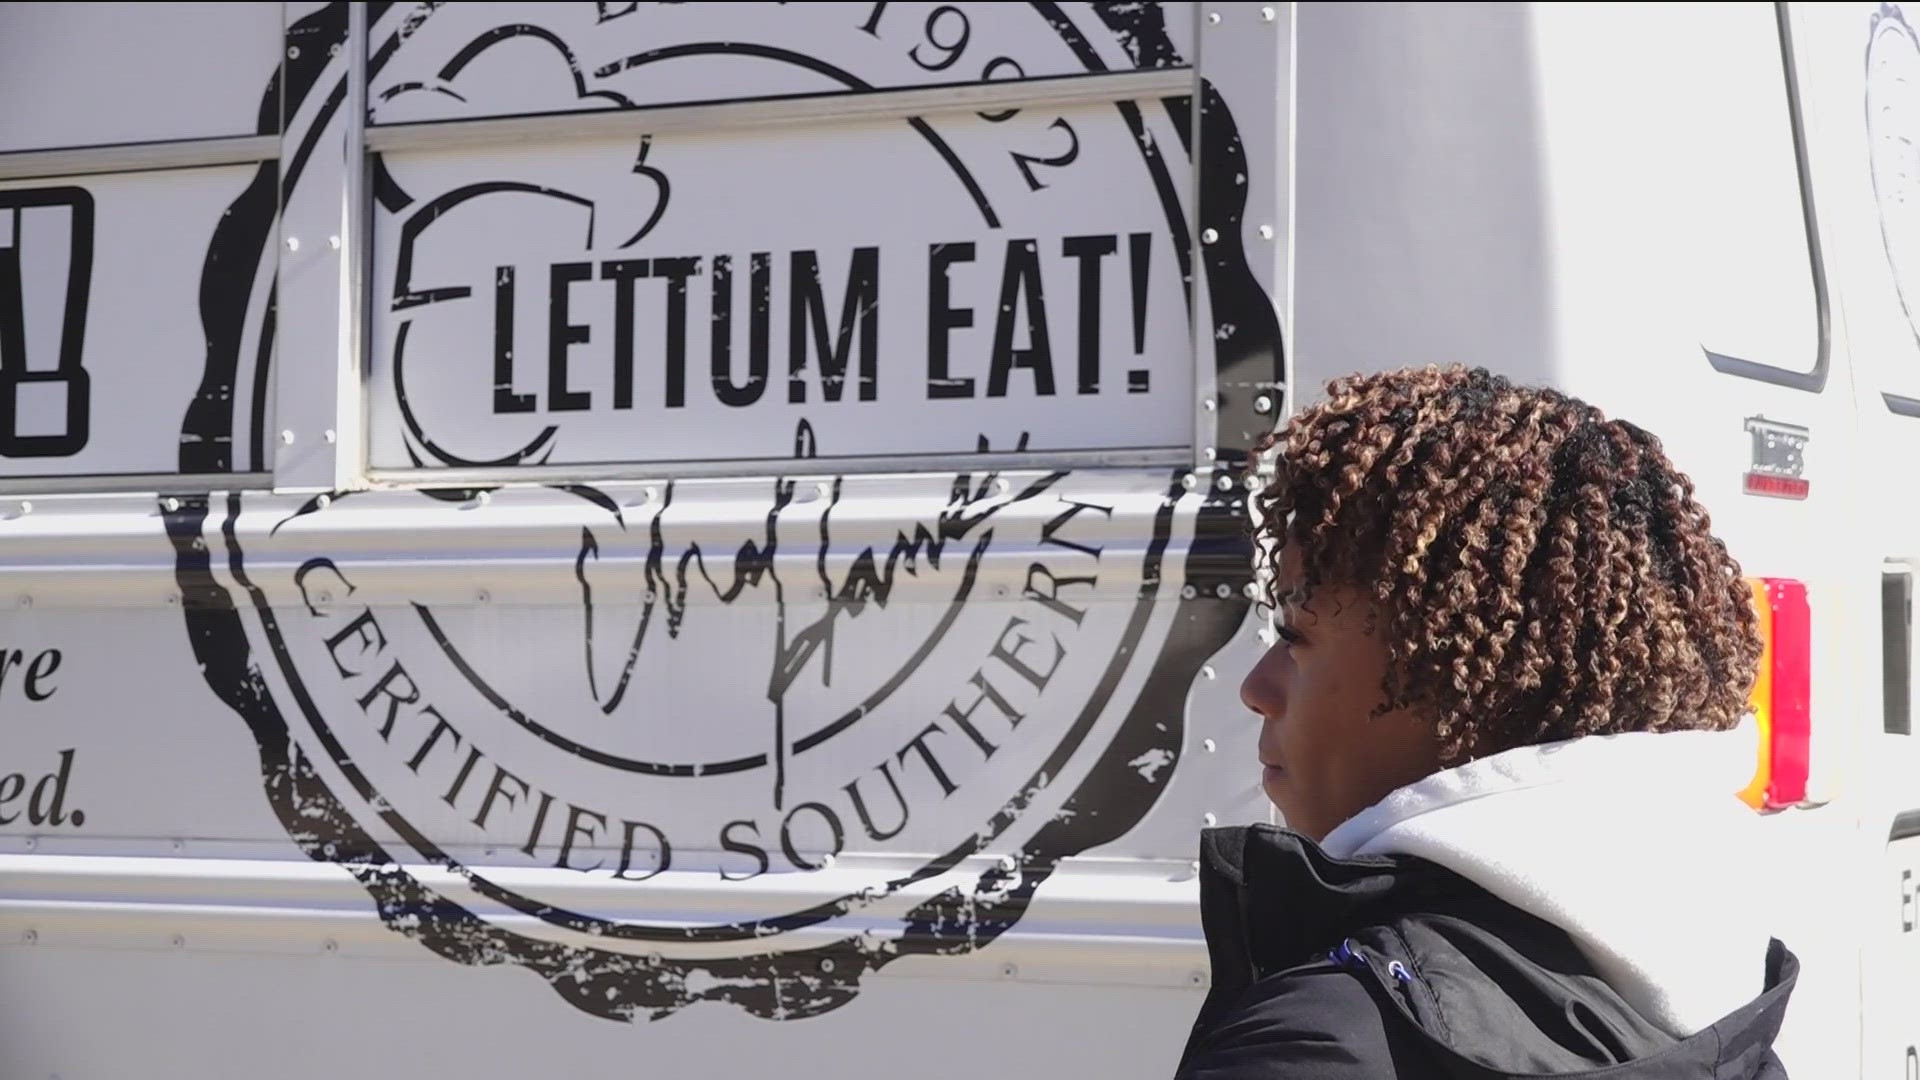 Chef Hank Reid is helping the homeless community through his food truck initiative.